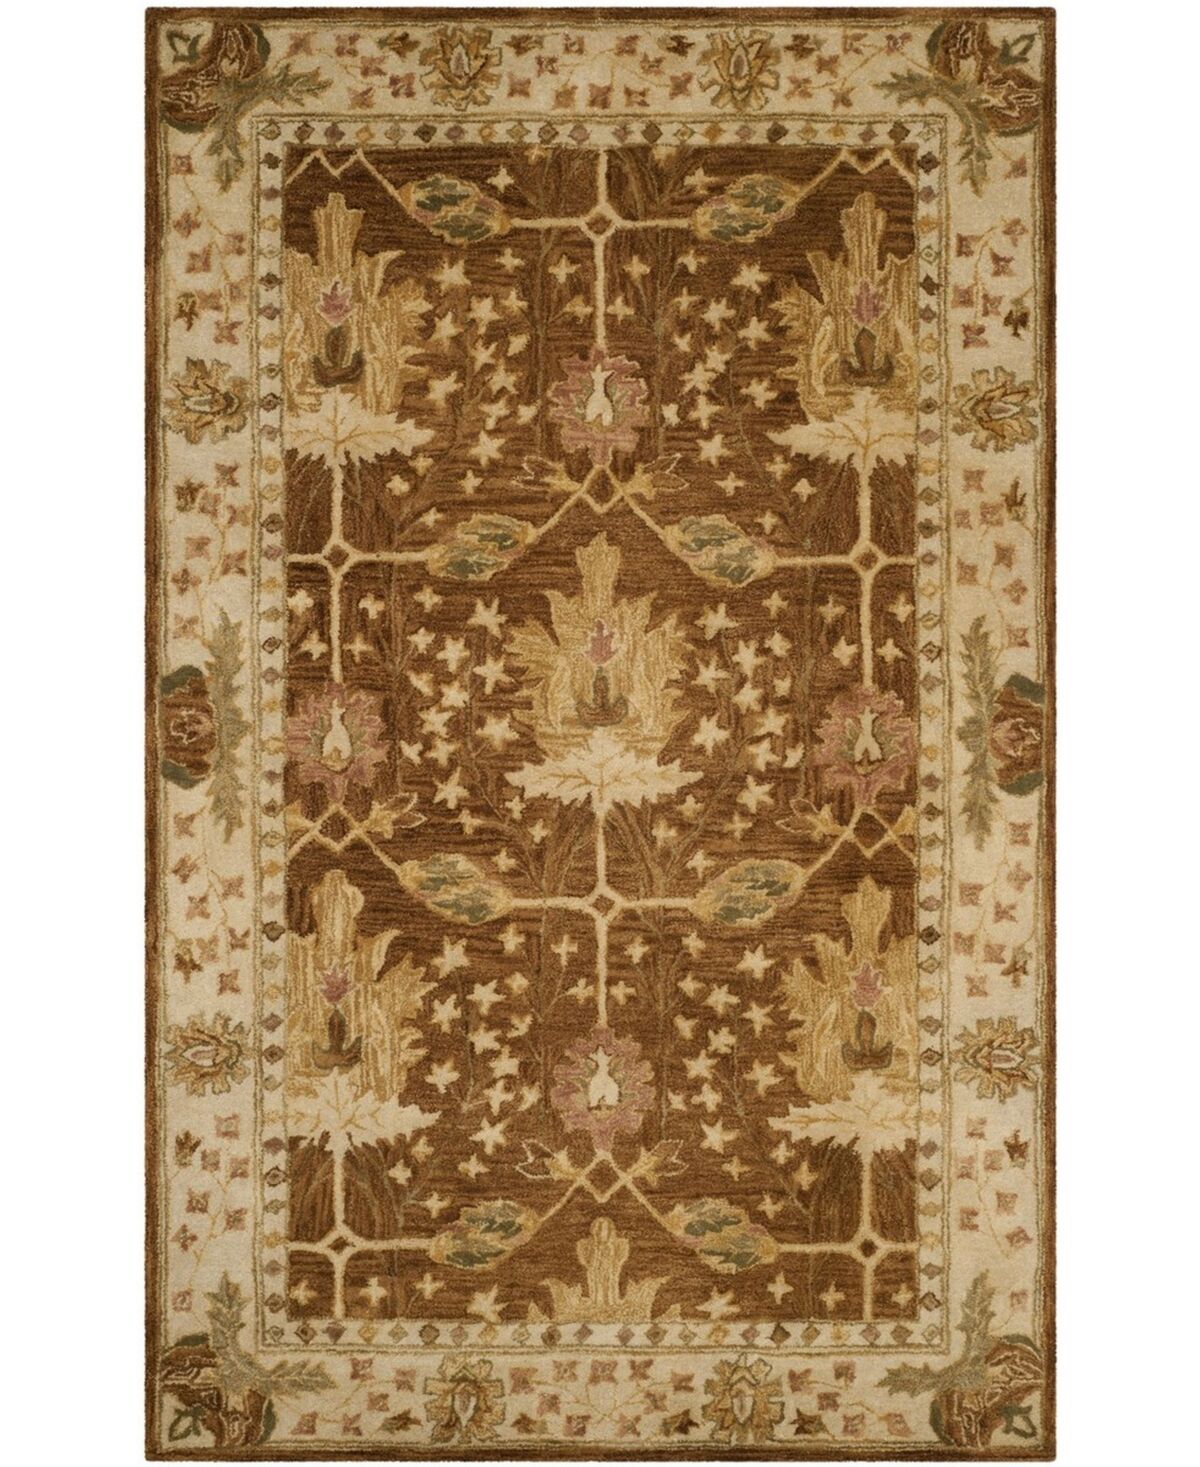 Safavieh Antiquity At840 Brown 5' x 8' Area Rug - Brown